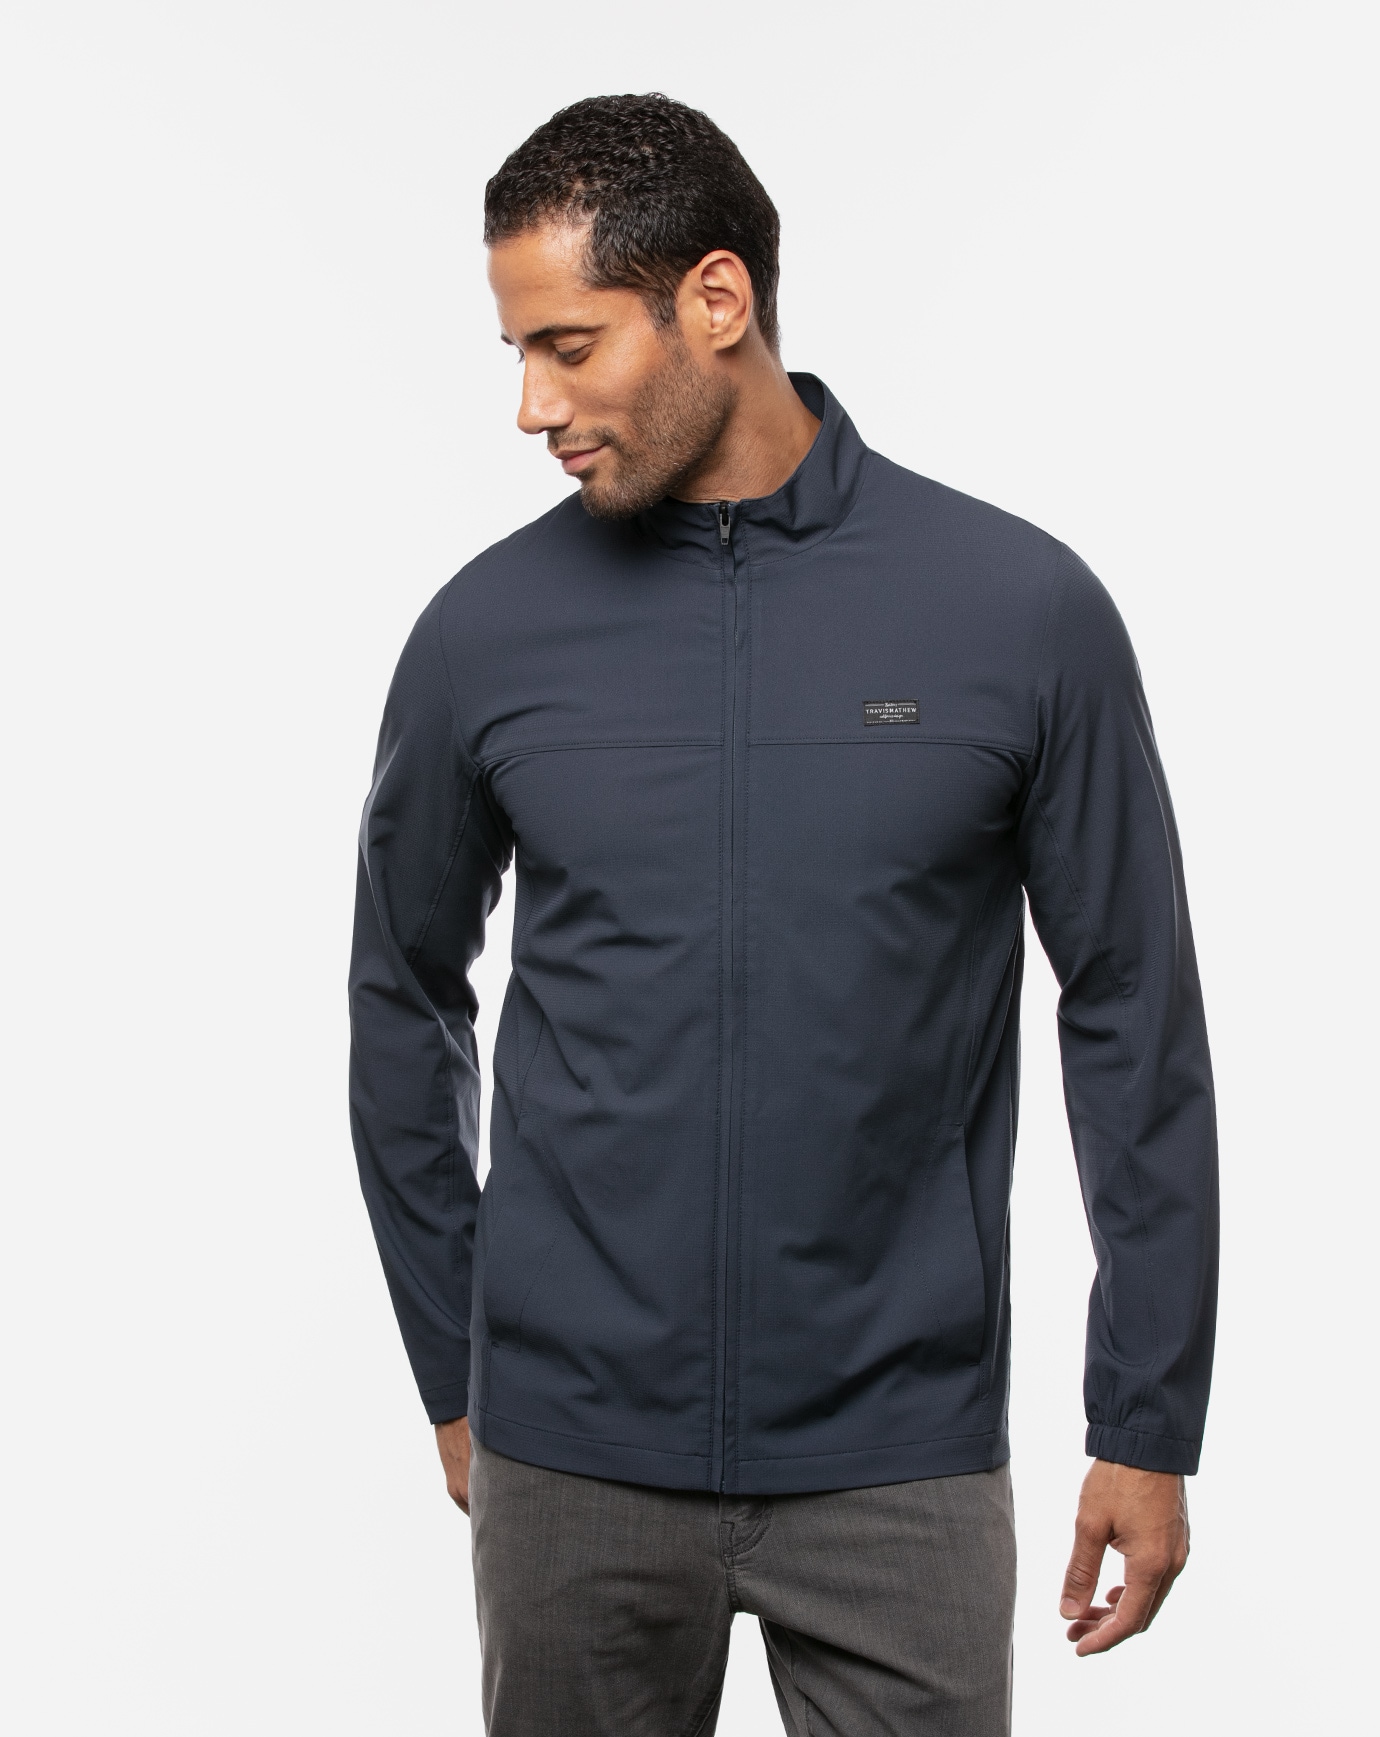 Related Product - CRYSTAL COVE 2.0 FULL ZIP